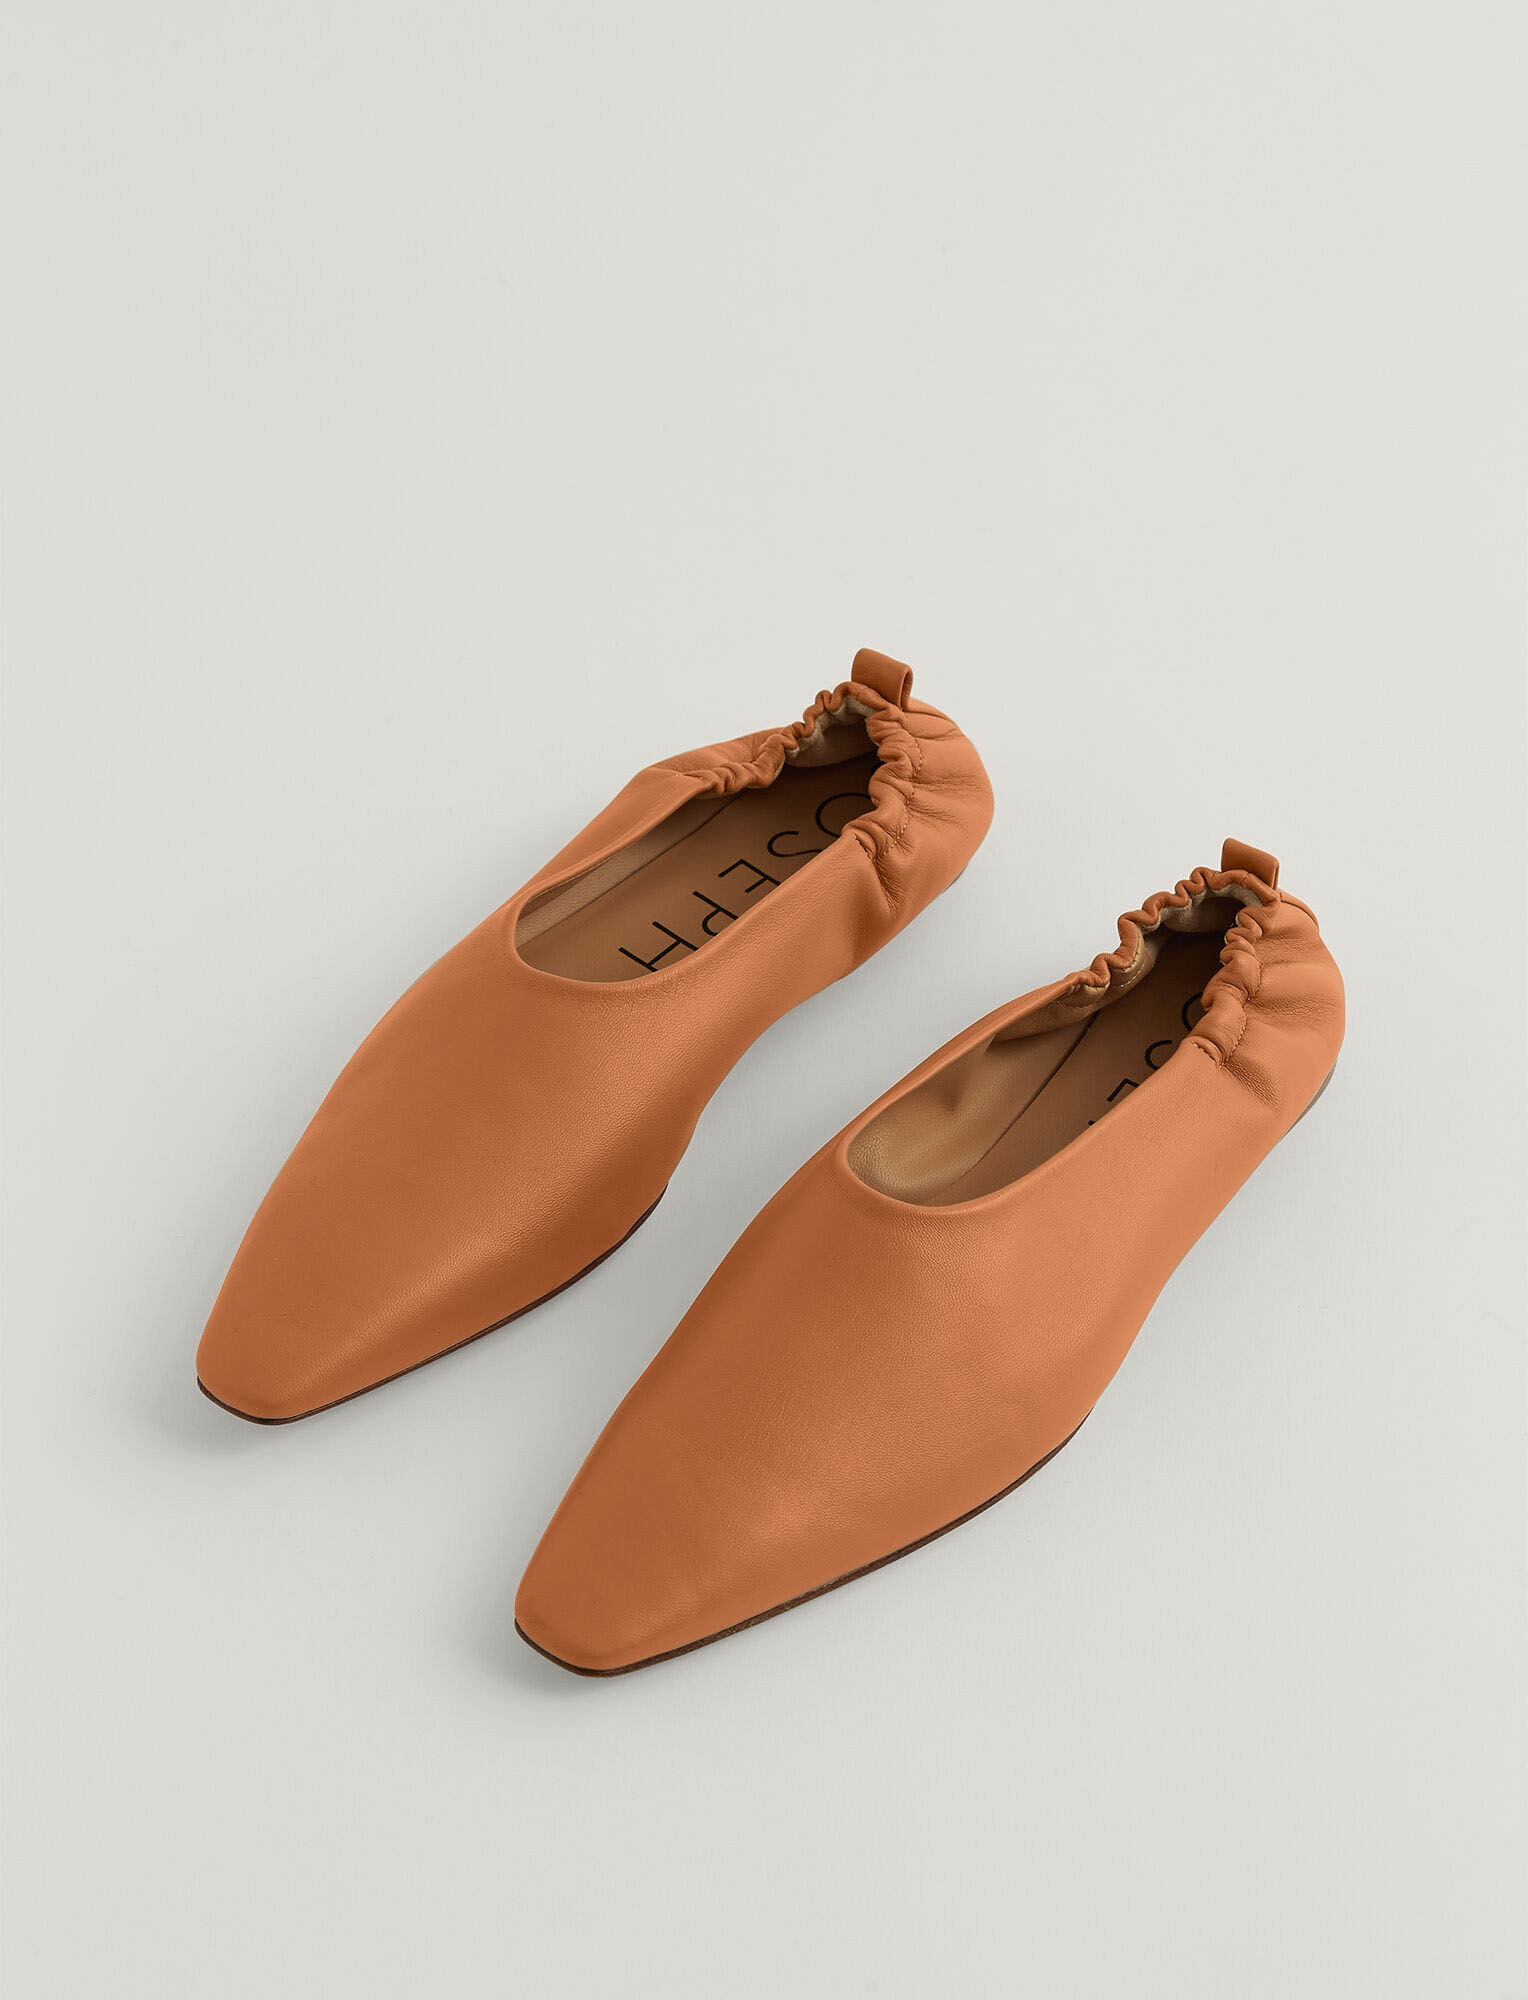 Leather Pointy Ballerina Shoes in JOSEPH US